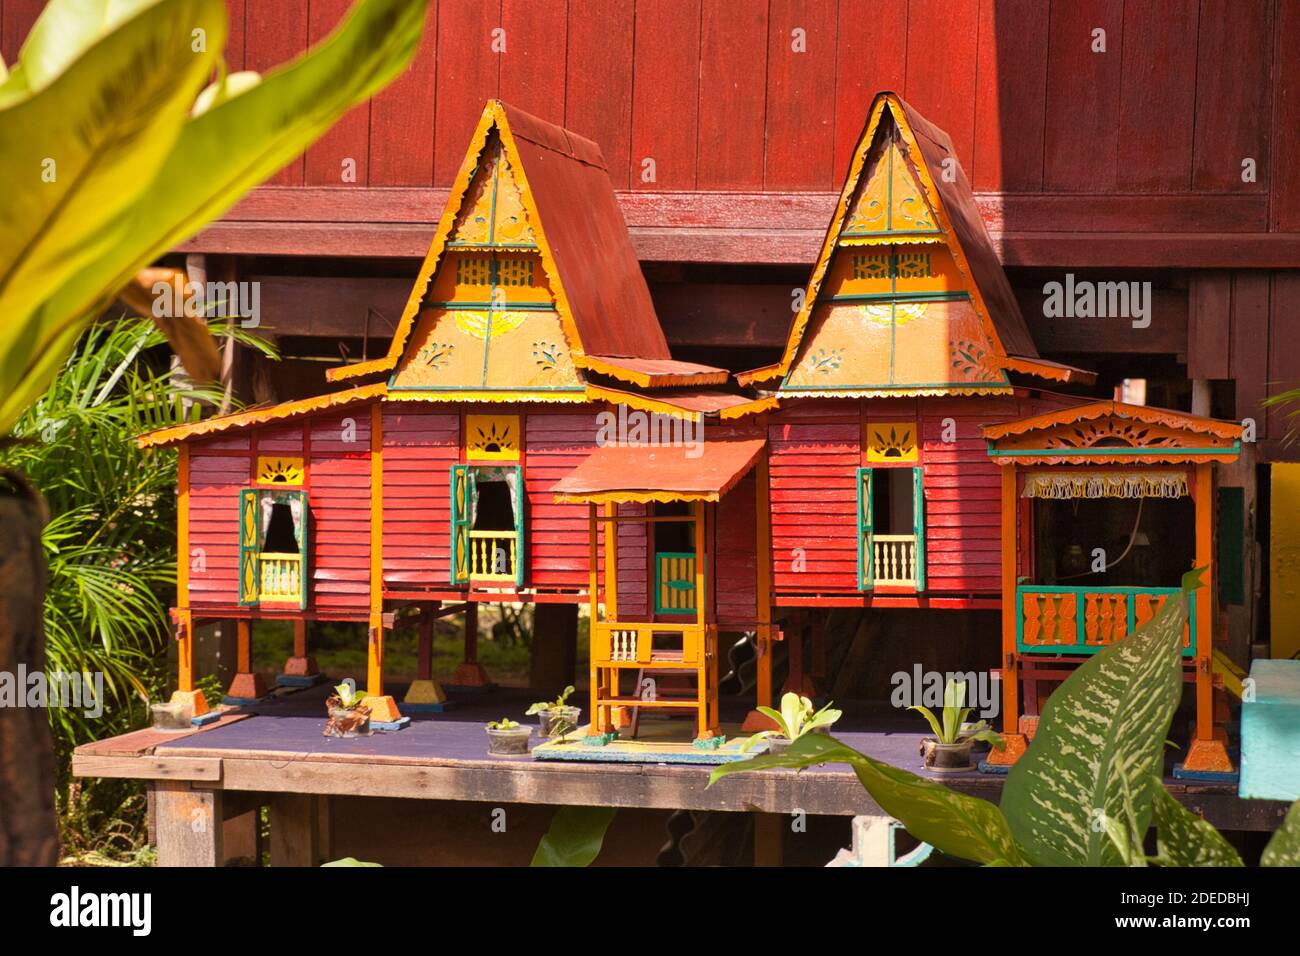 A miniature model of a typical Malaysian house with pointed roof and porch on the front, in Malacca, Malaysia Stock Photo